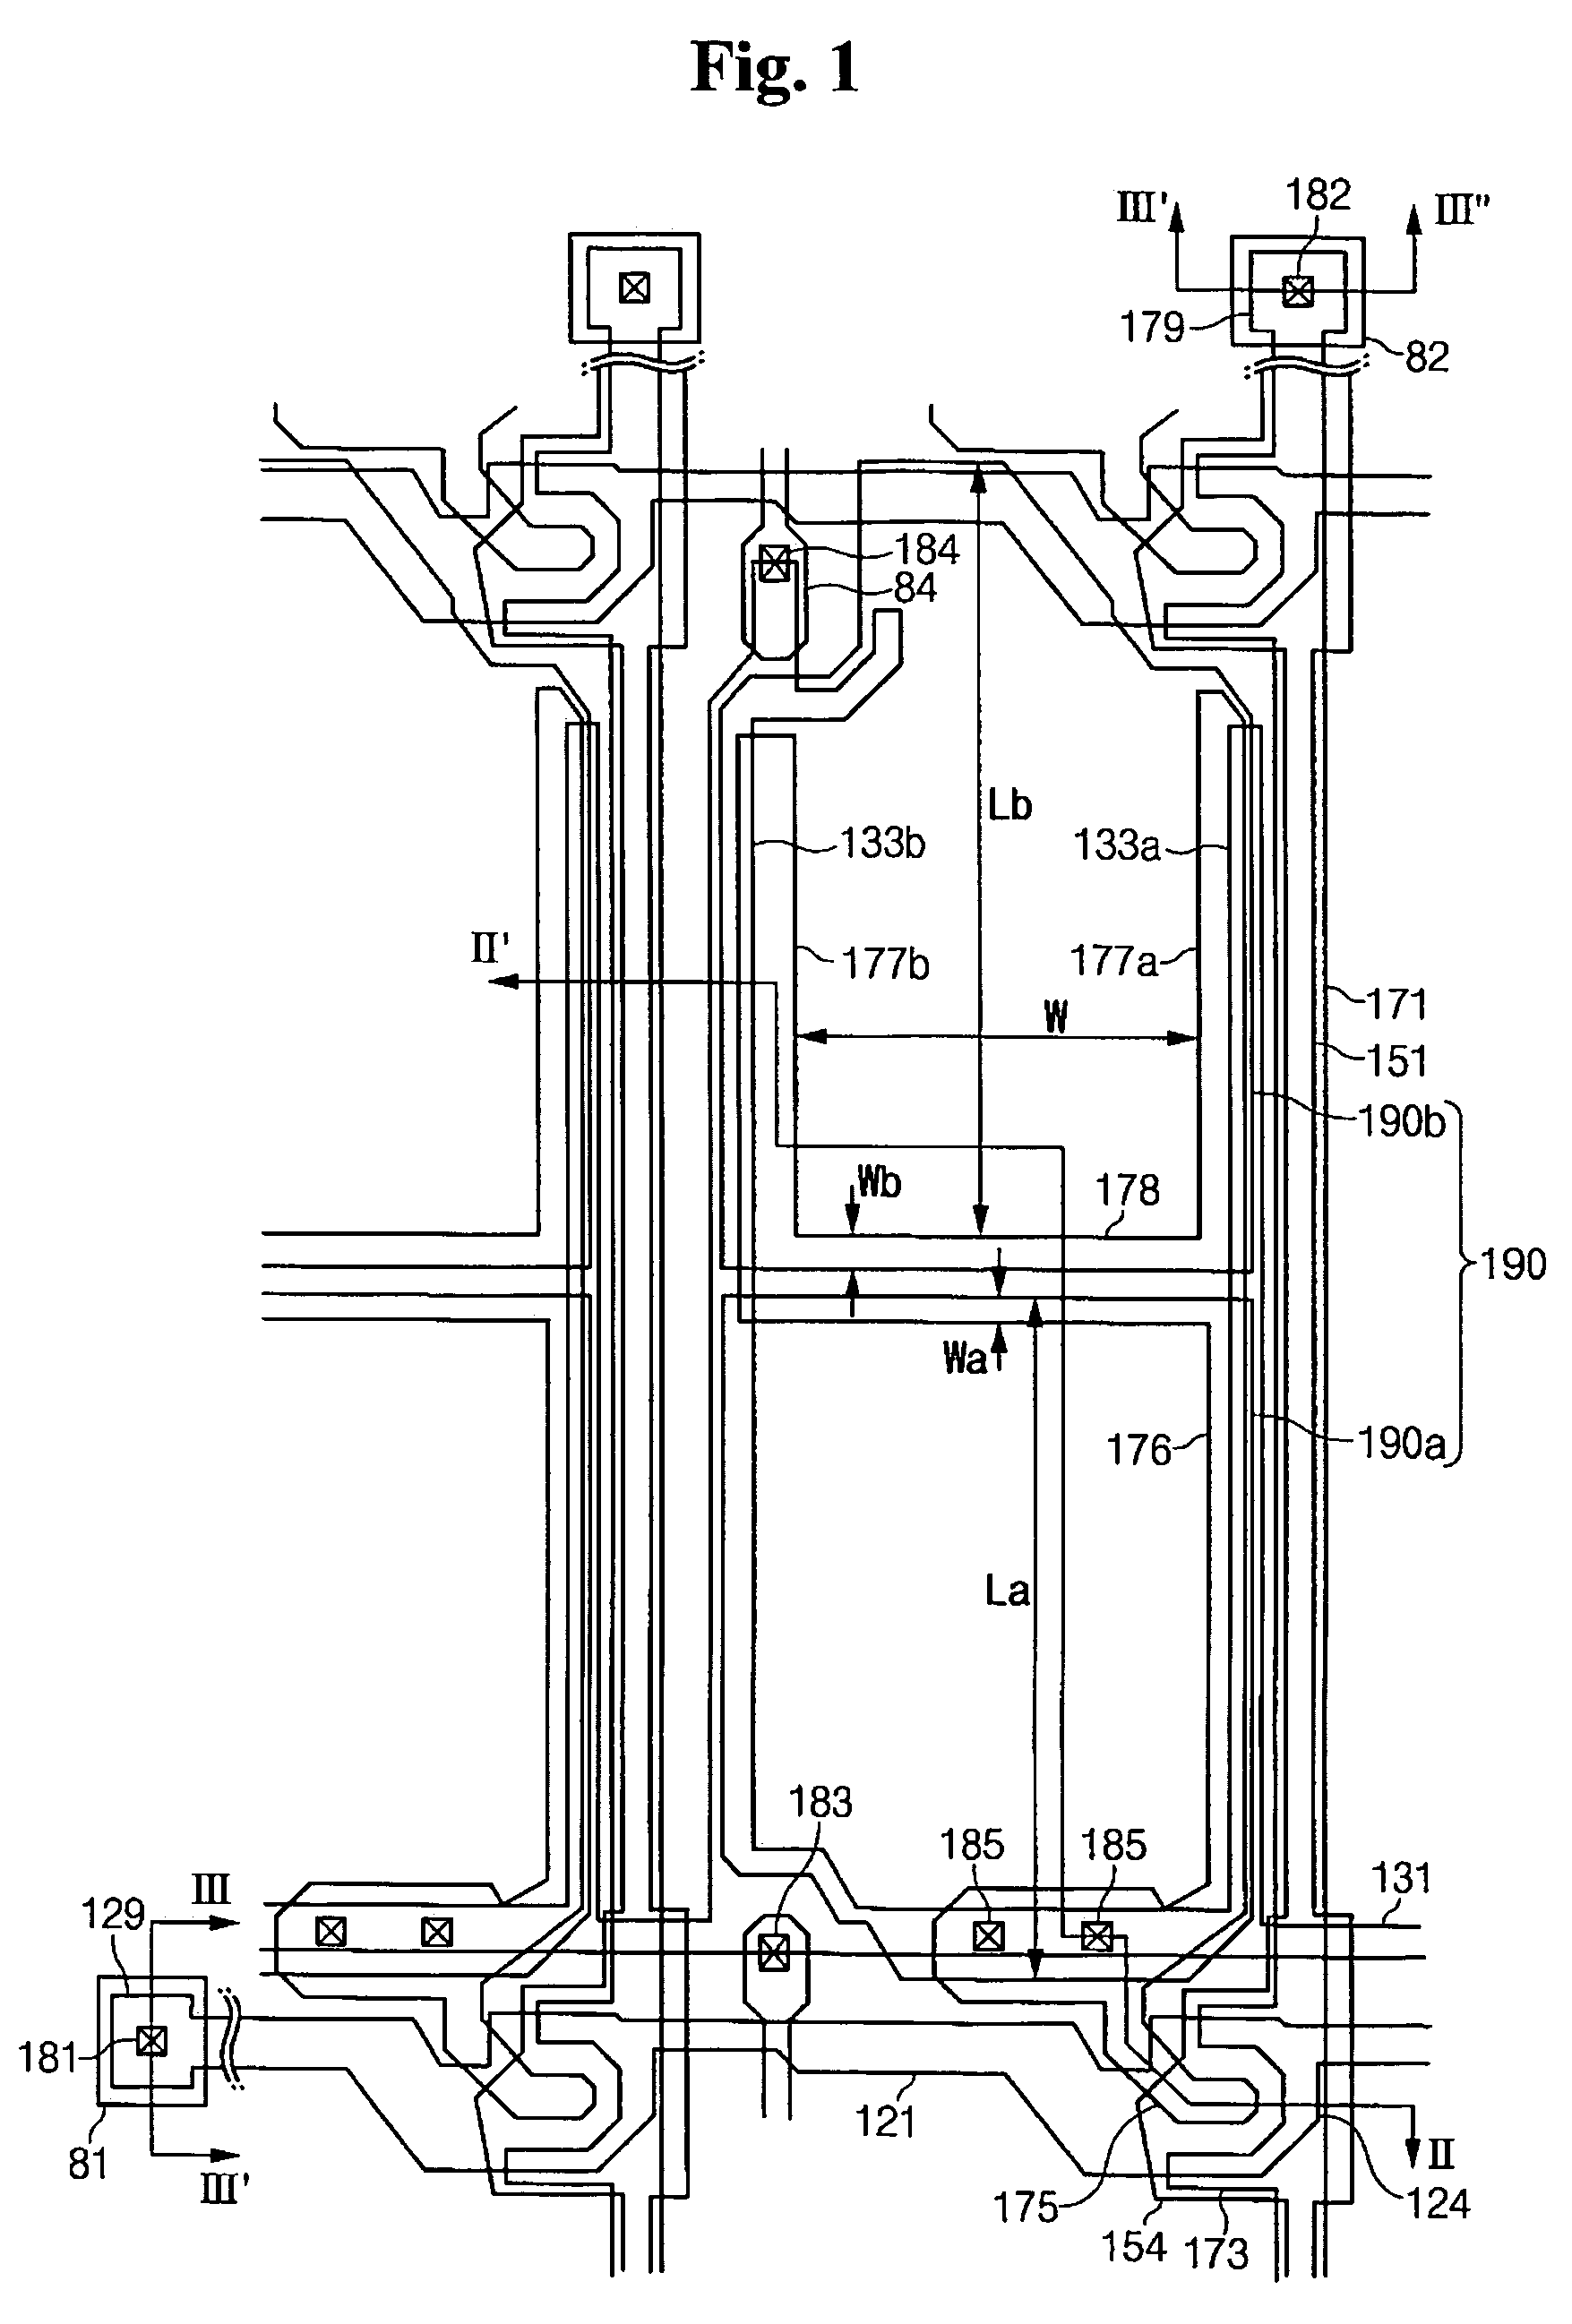 TFT array panel having a two-portion coupling electrode extending from drain electrode in different directions with first portion extending along a gap between two overlapping subpixel electrodes thereon and second portion extending in same direction as data line